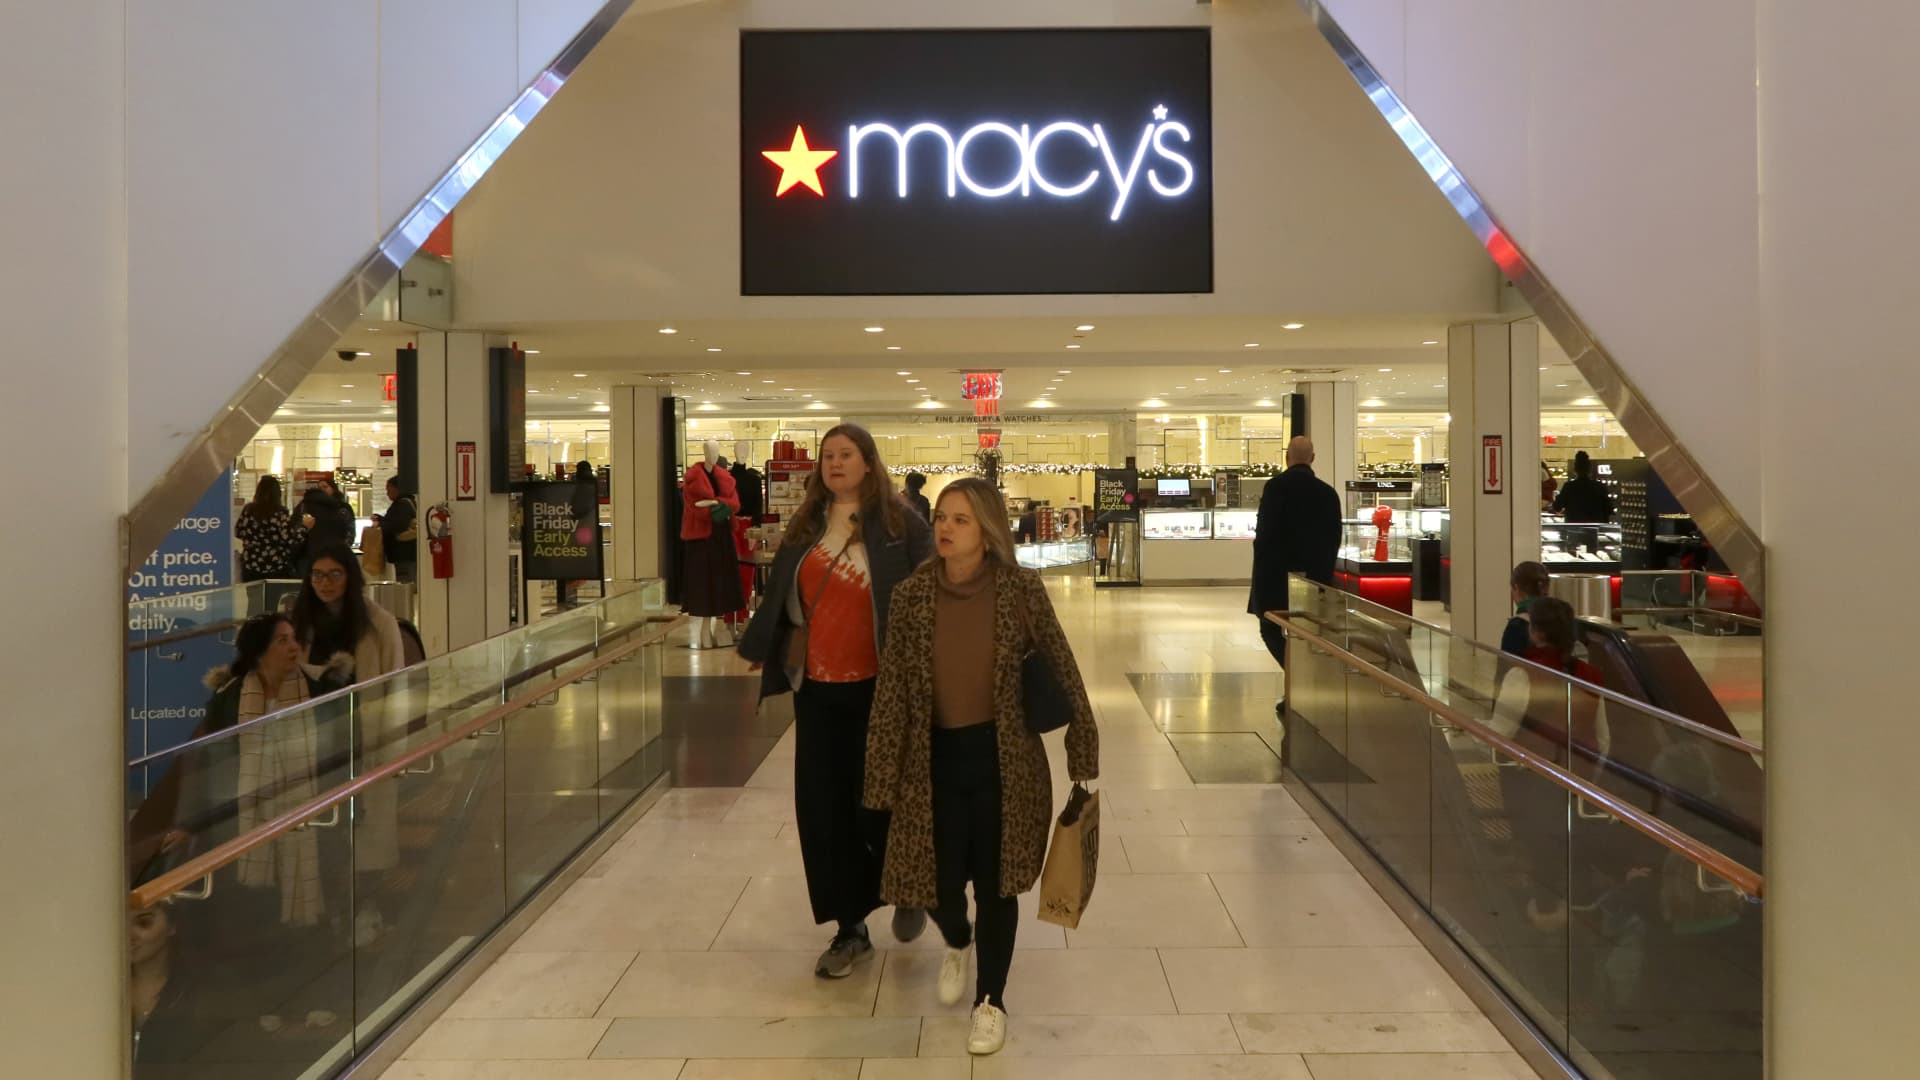 Macy’s receives $5.8 billion buyout offer, sources say